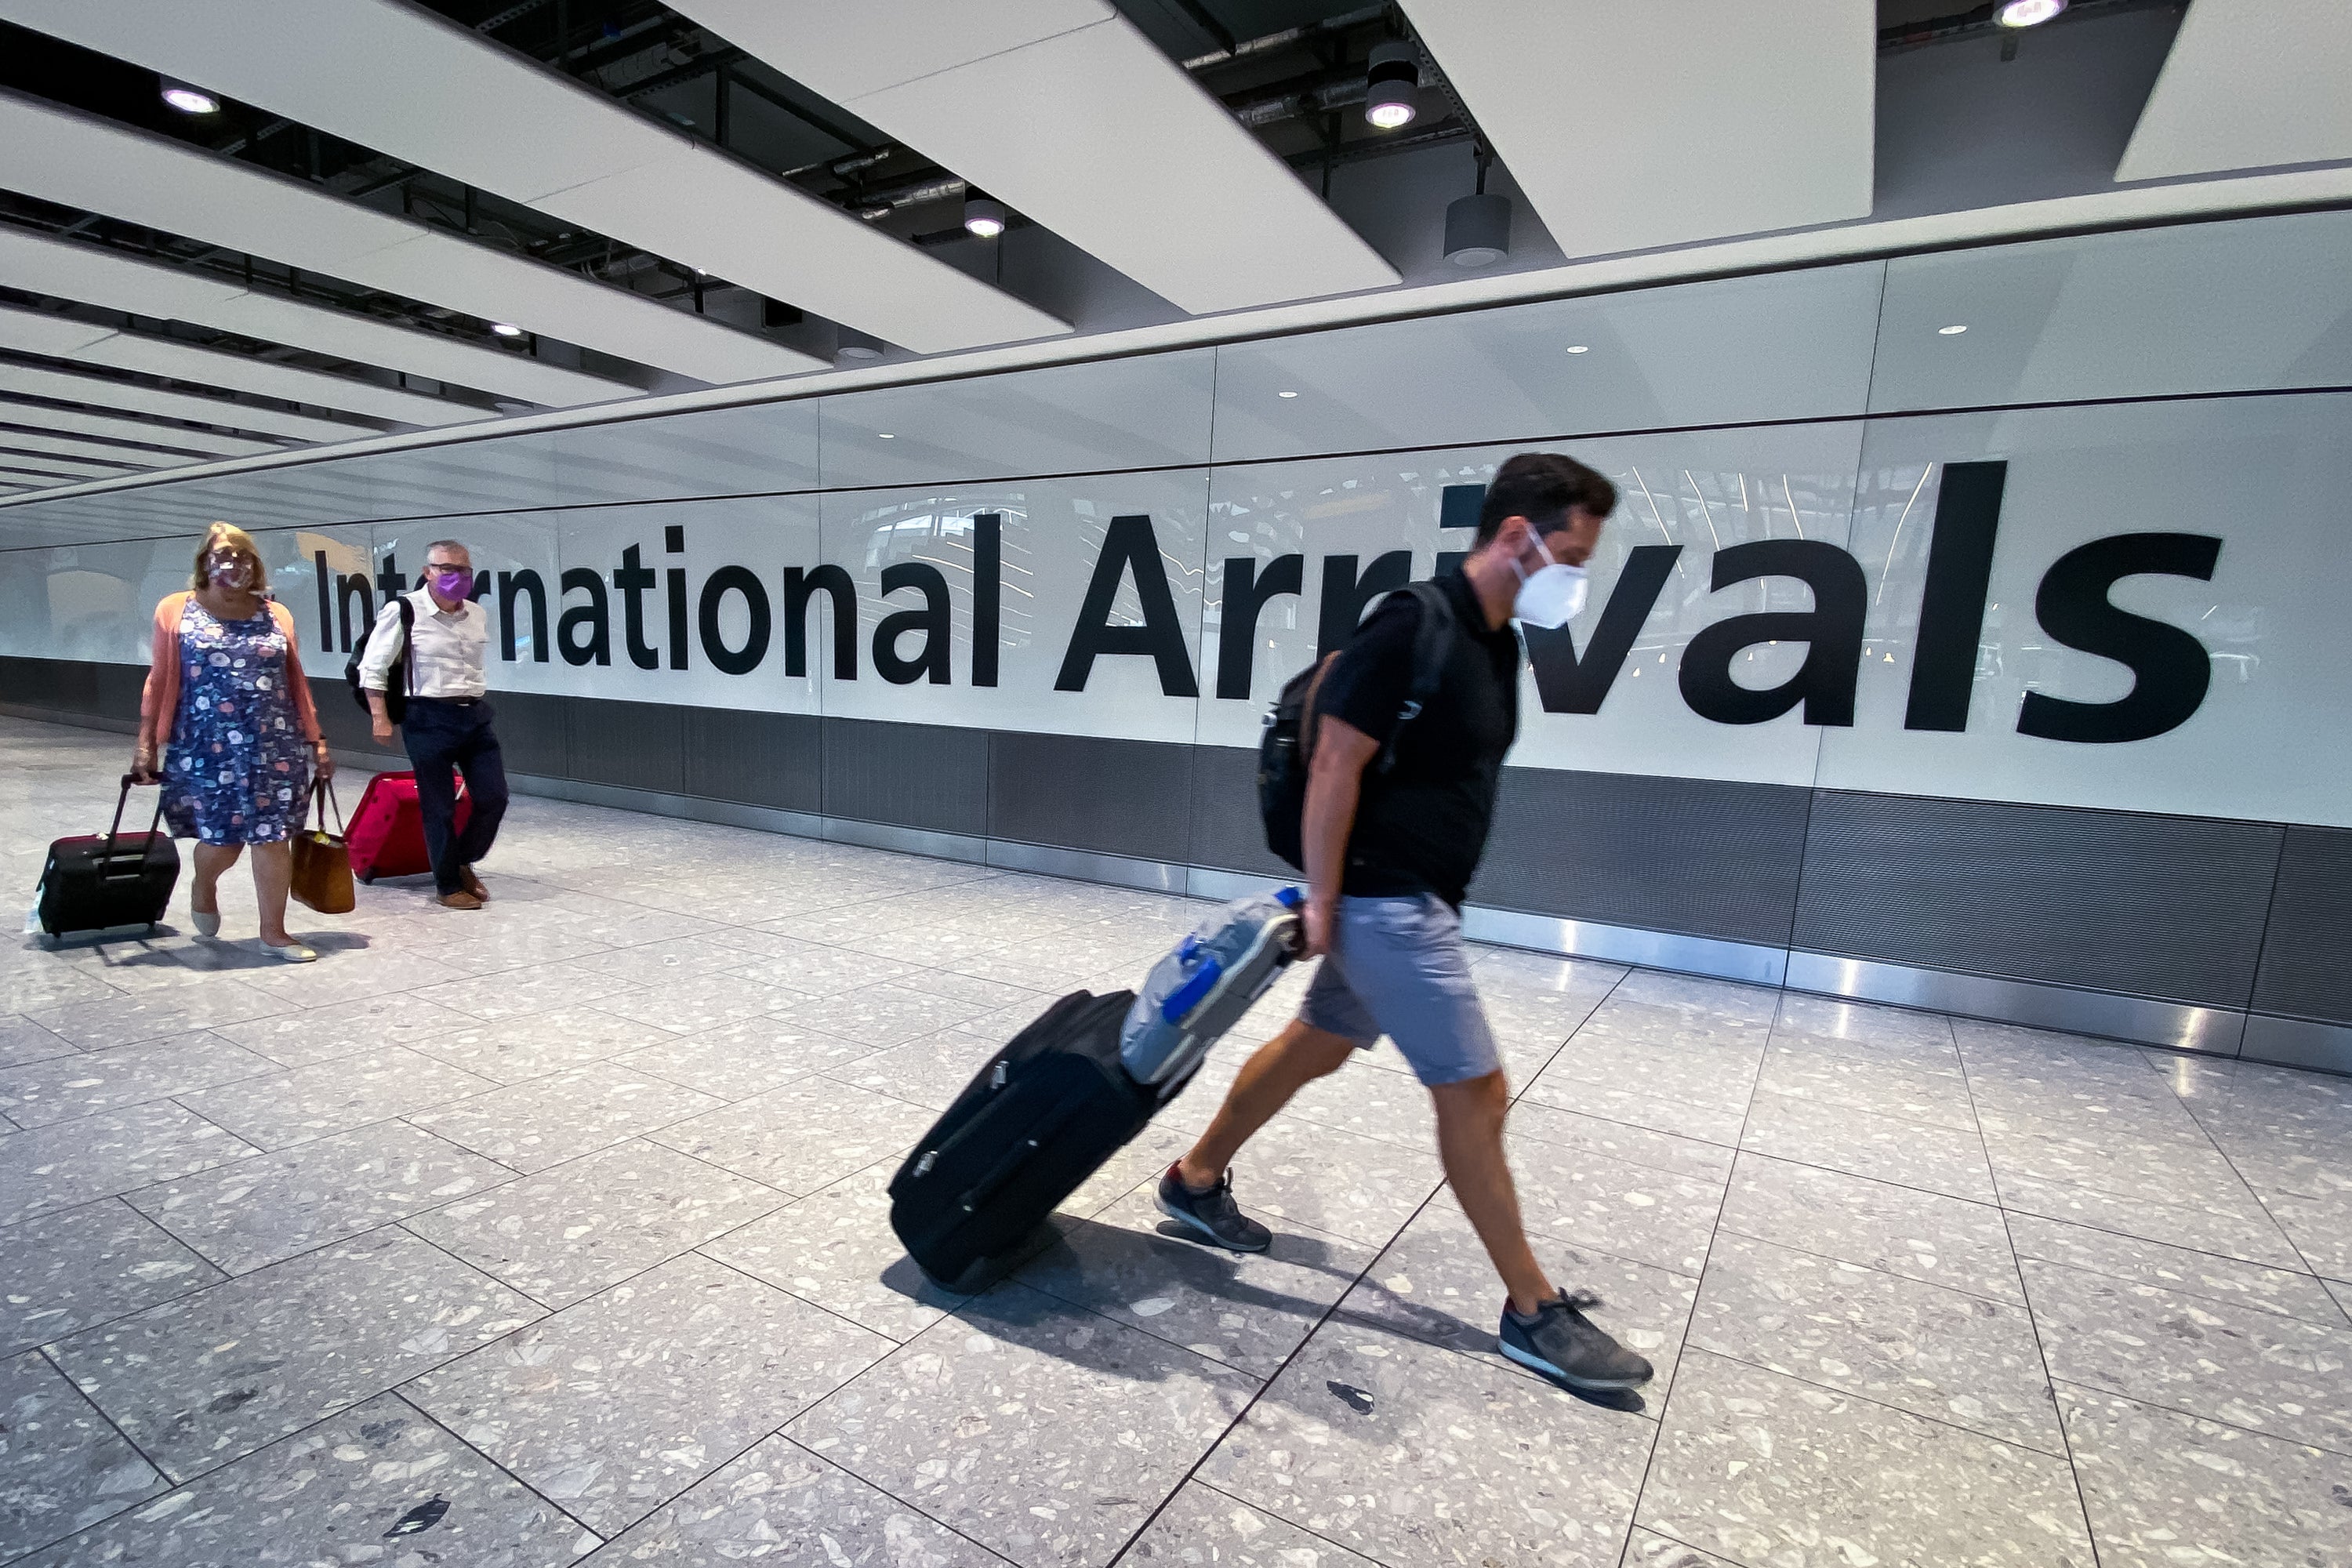 Passengers in the arrivals hall at Heathrow Airport (Aaron Chown/PA)